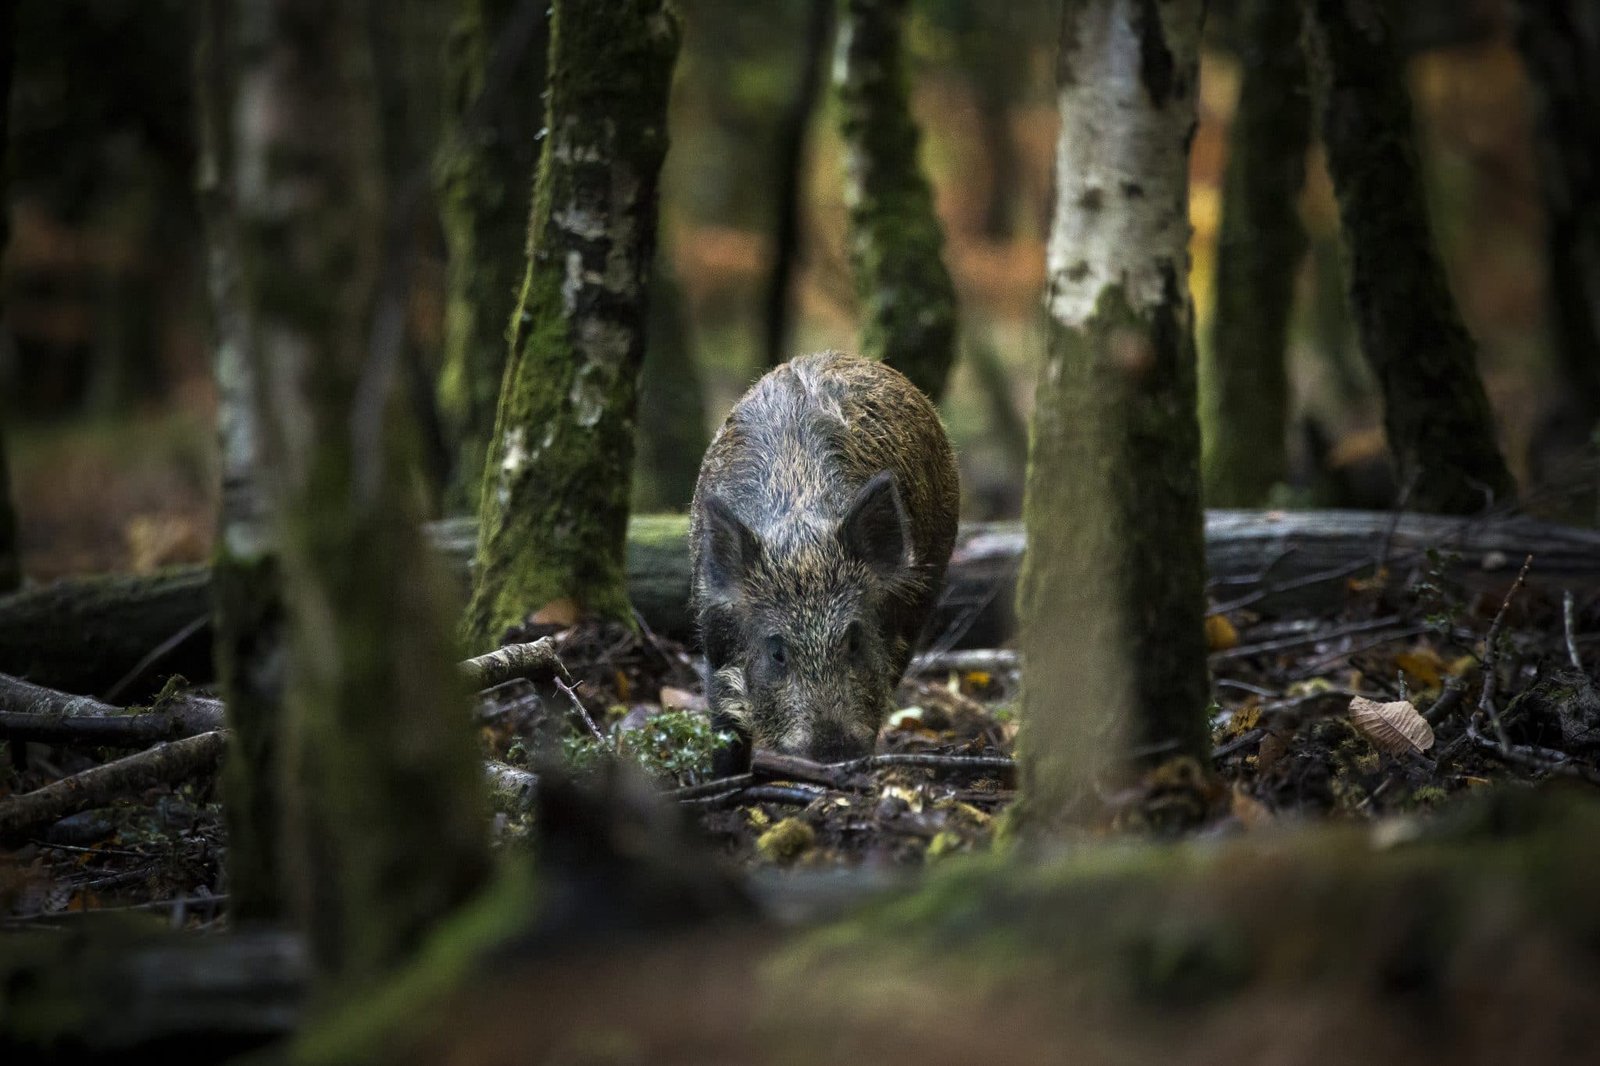 A wild boar deep within a forest in Forest with trees around